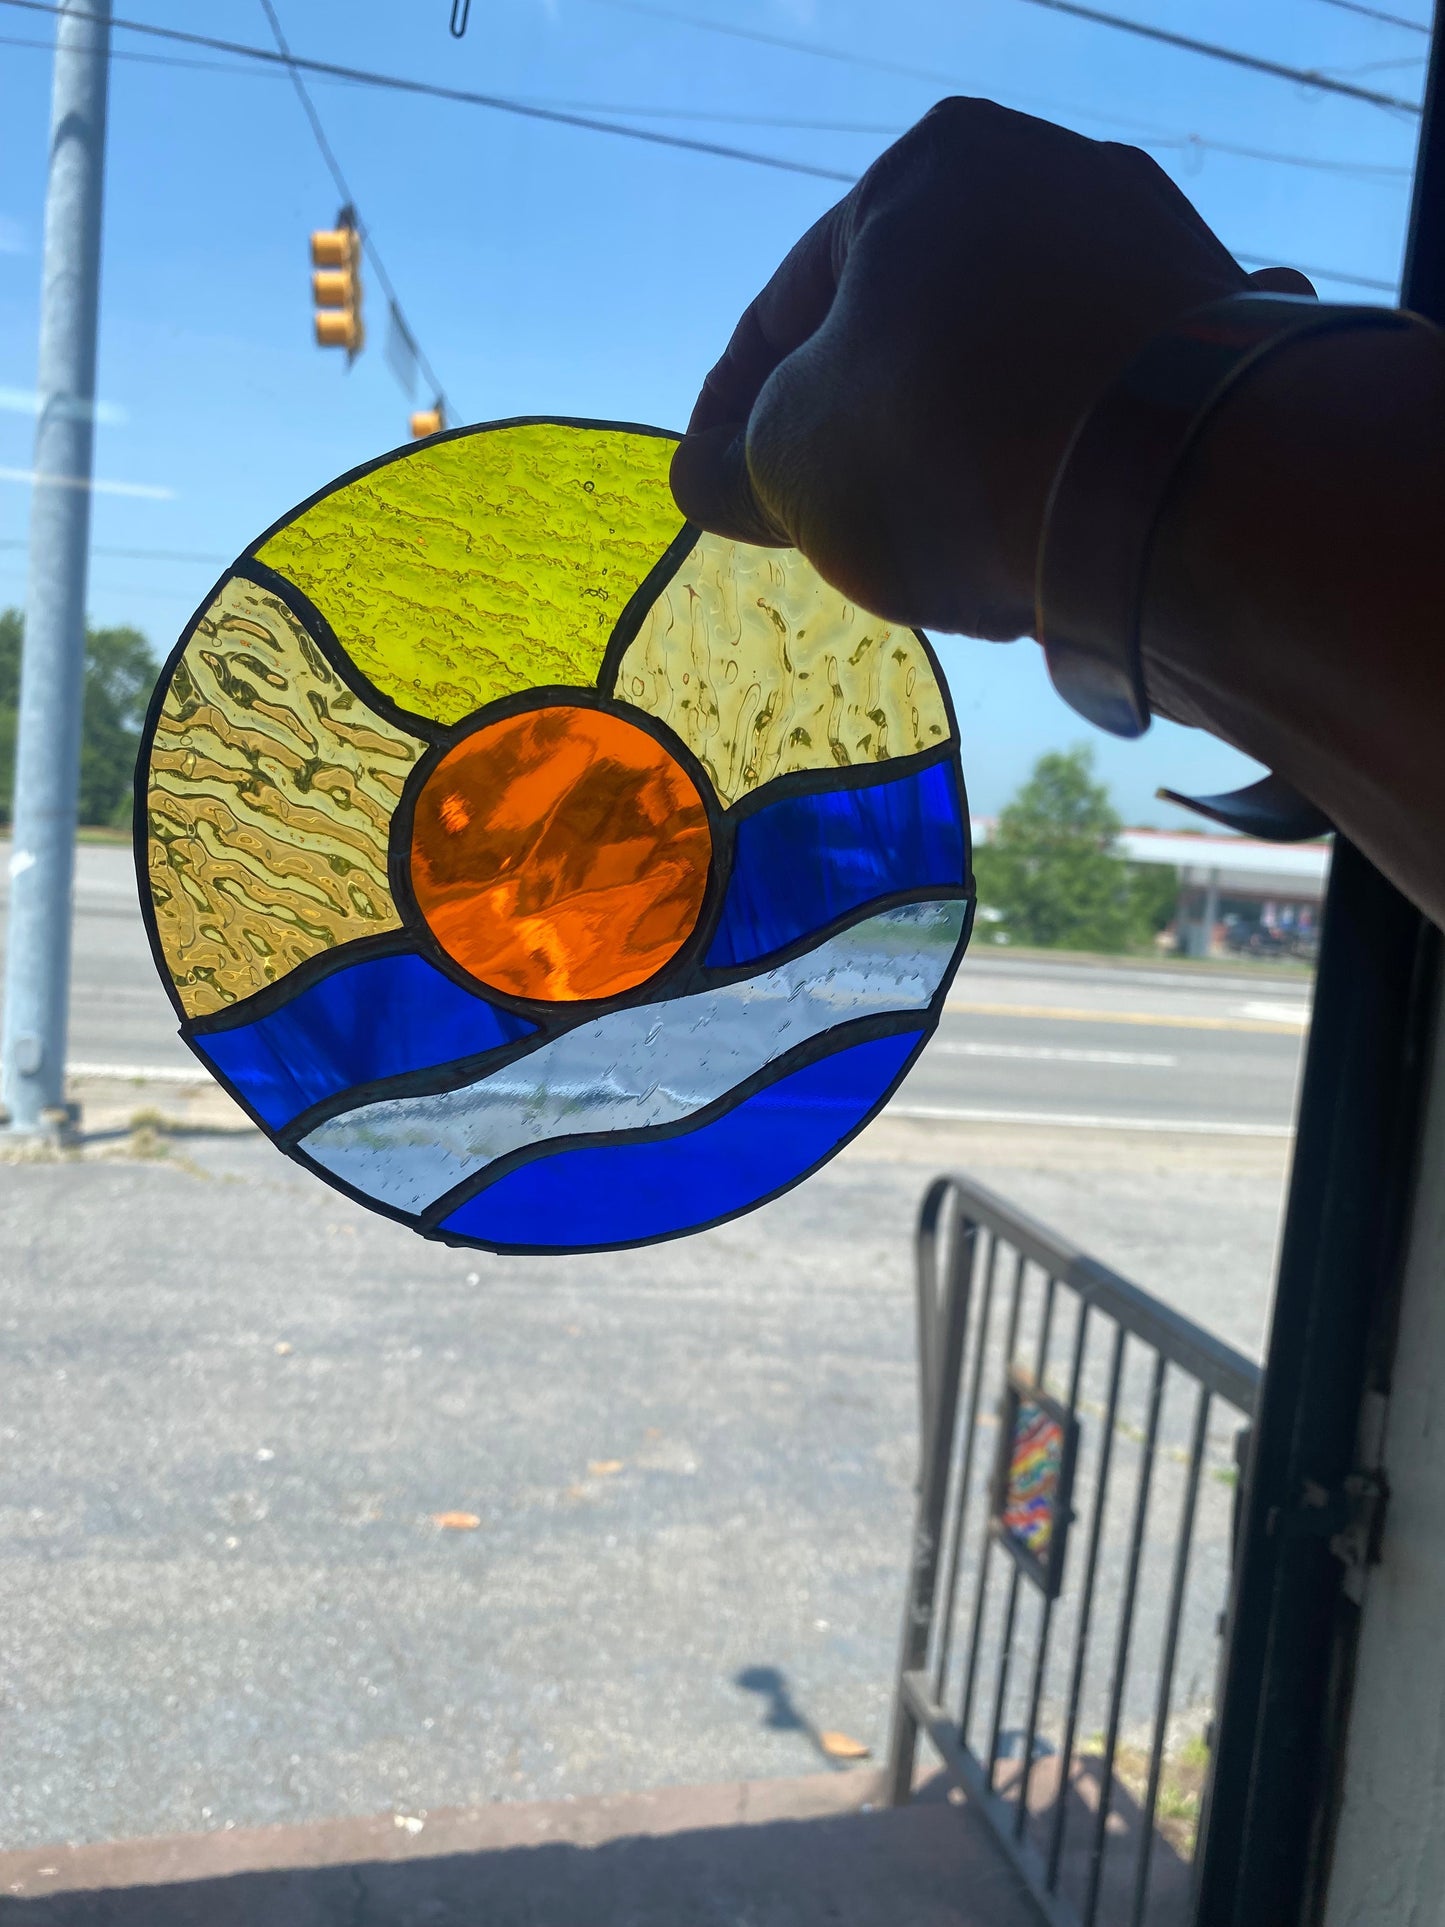 Beginner Stained Glass class, May 9, 11-2:00 pm